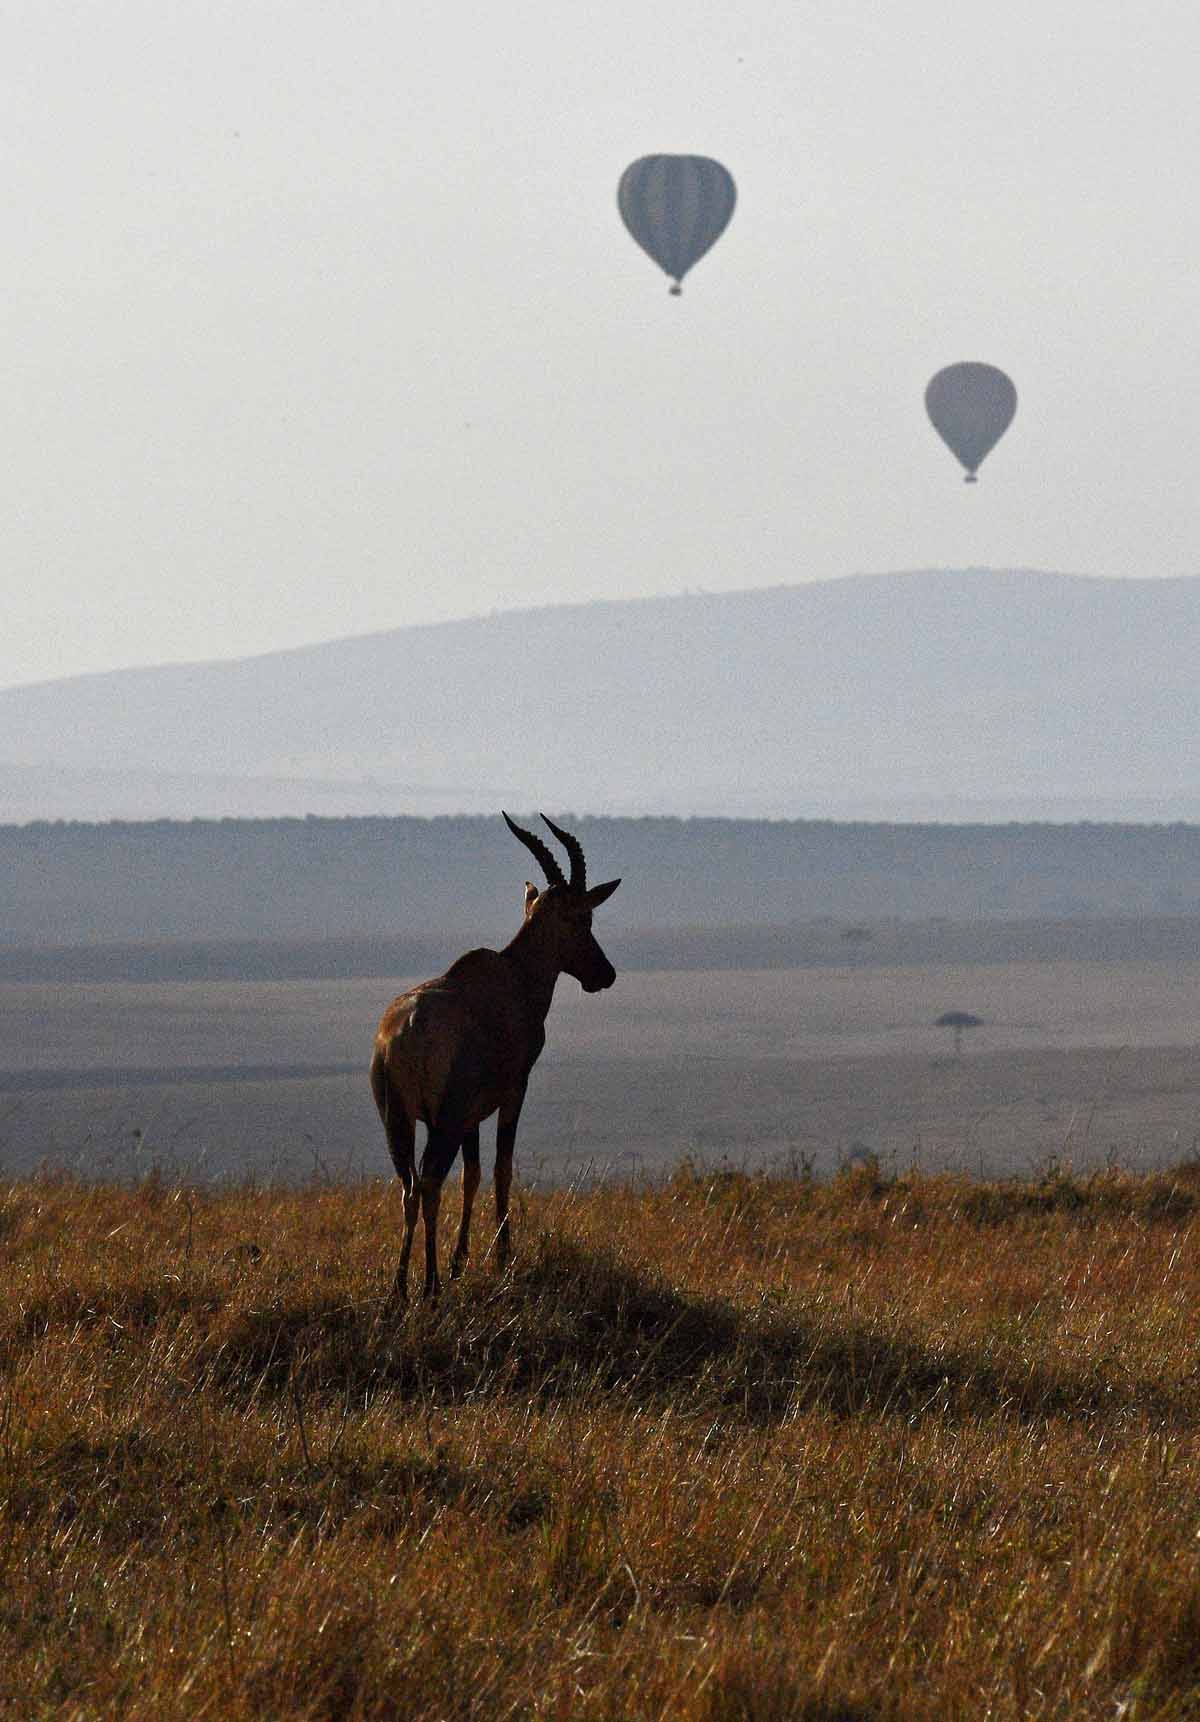 A hartebeest, an African antelope also known as kongoni, is silhouetted during the annual wildebeest migration in the Masai Mara game reserve on September 13, 2016.